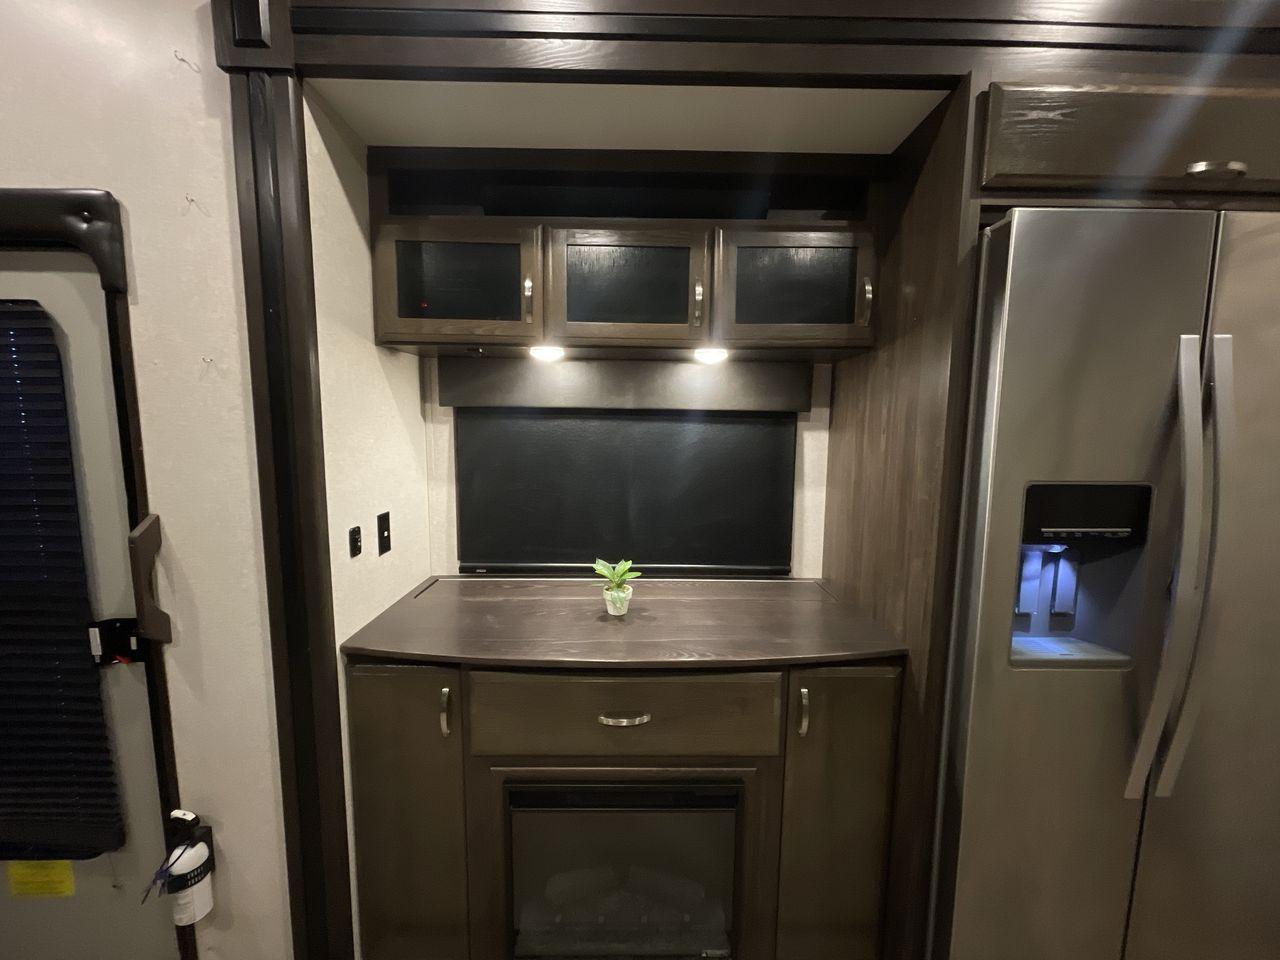 2018 GRAY JAYCO SEISMIC 4250 - (1UJCJSCV5J1) , Length: 44.92 ft. | Dry Weight: 15,570 lbs. | Gross Weight: 20,000 lbs. | Slides: 3 transmission, located at 4319 N Main St, Cleburne, TX, 76033, (817) 678-5133, 32.385960, -97.391212 - Set out to the great outdoors in this 2018 Jayco Seismic 4250 and enjoy all the amenities it has to offer! This toy hauler measures just a bit under 45 ft. in length and 13.32 ft. in height, providing great space and comfort. It has a dry weight of 15,570 lbs. and a GVWR of 20,000 lbs. It also comes - Photo #20